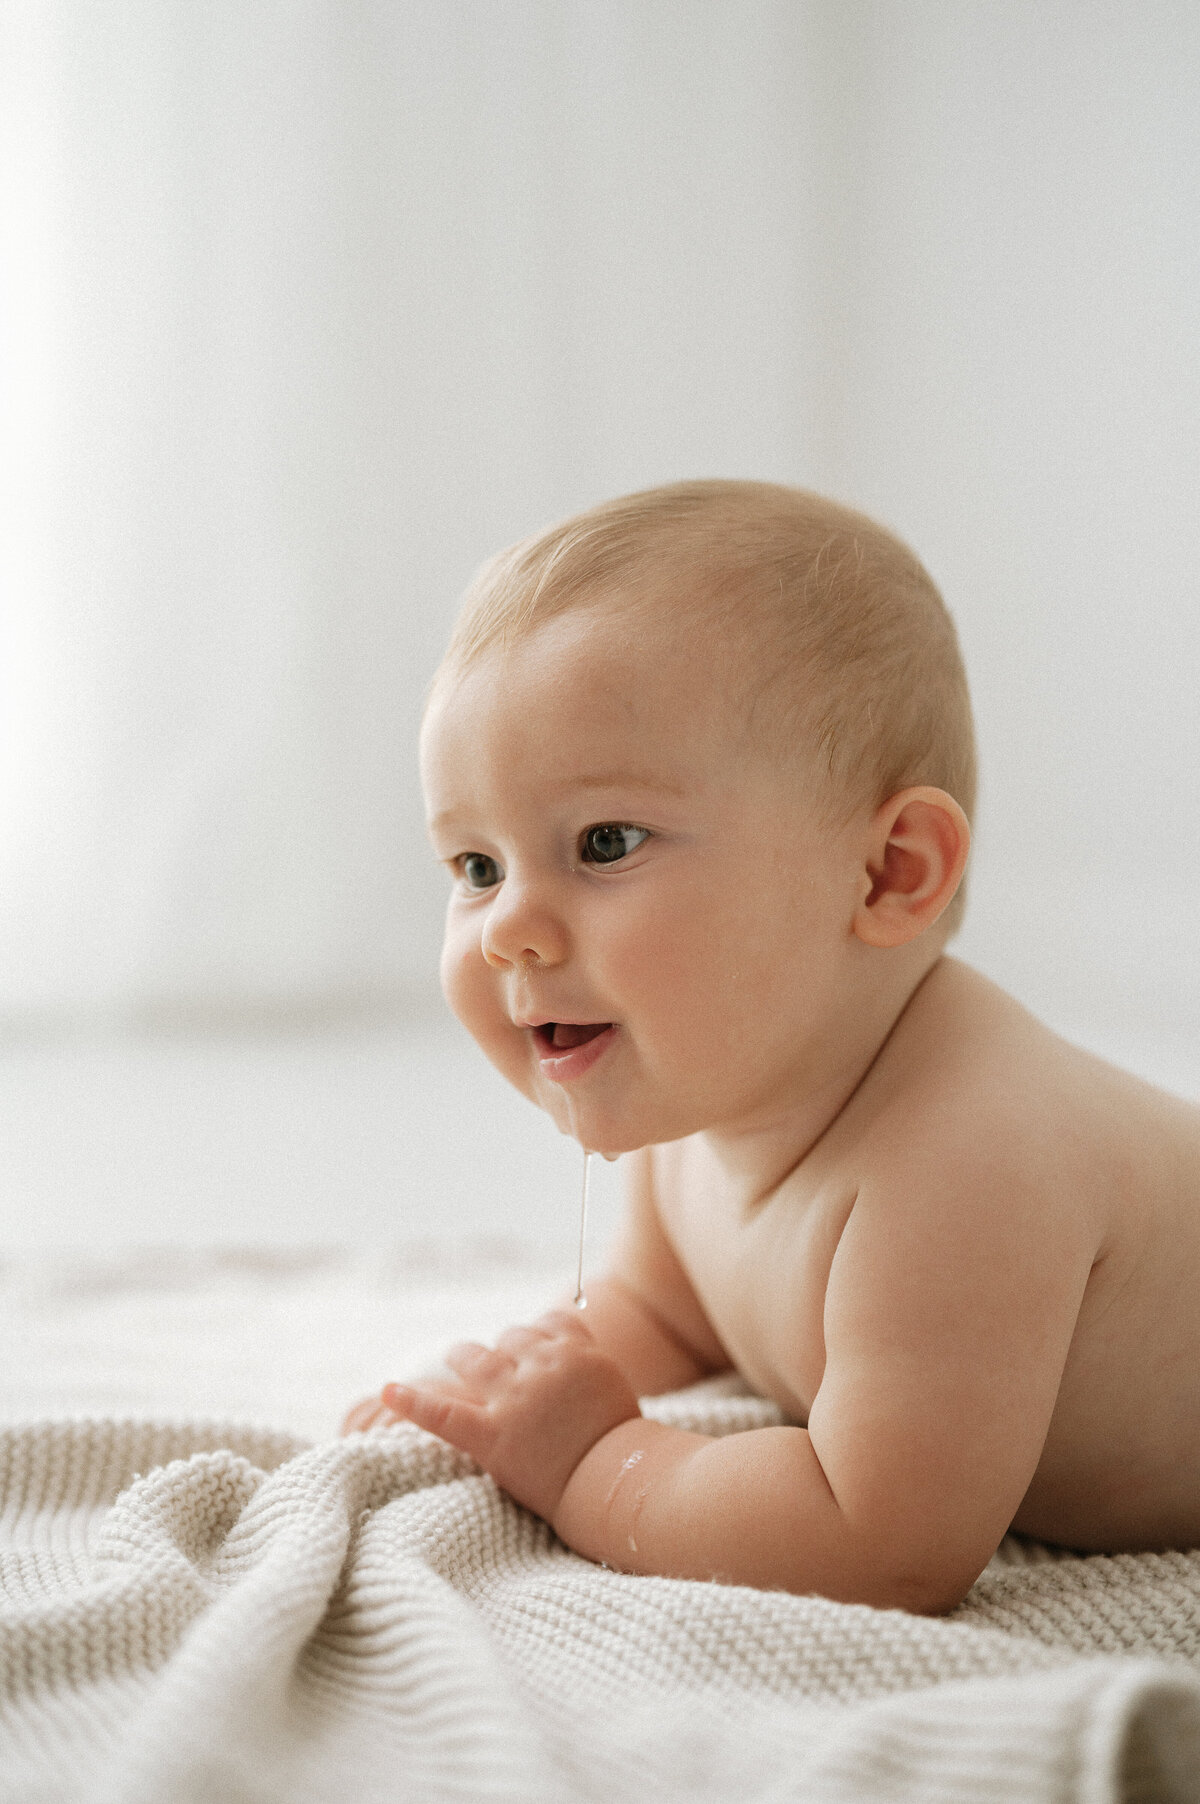 Baby photography of a young baby lying on a white blanket